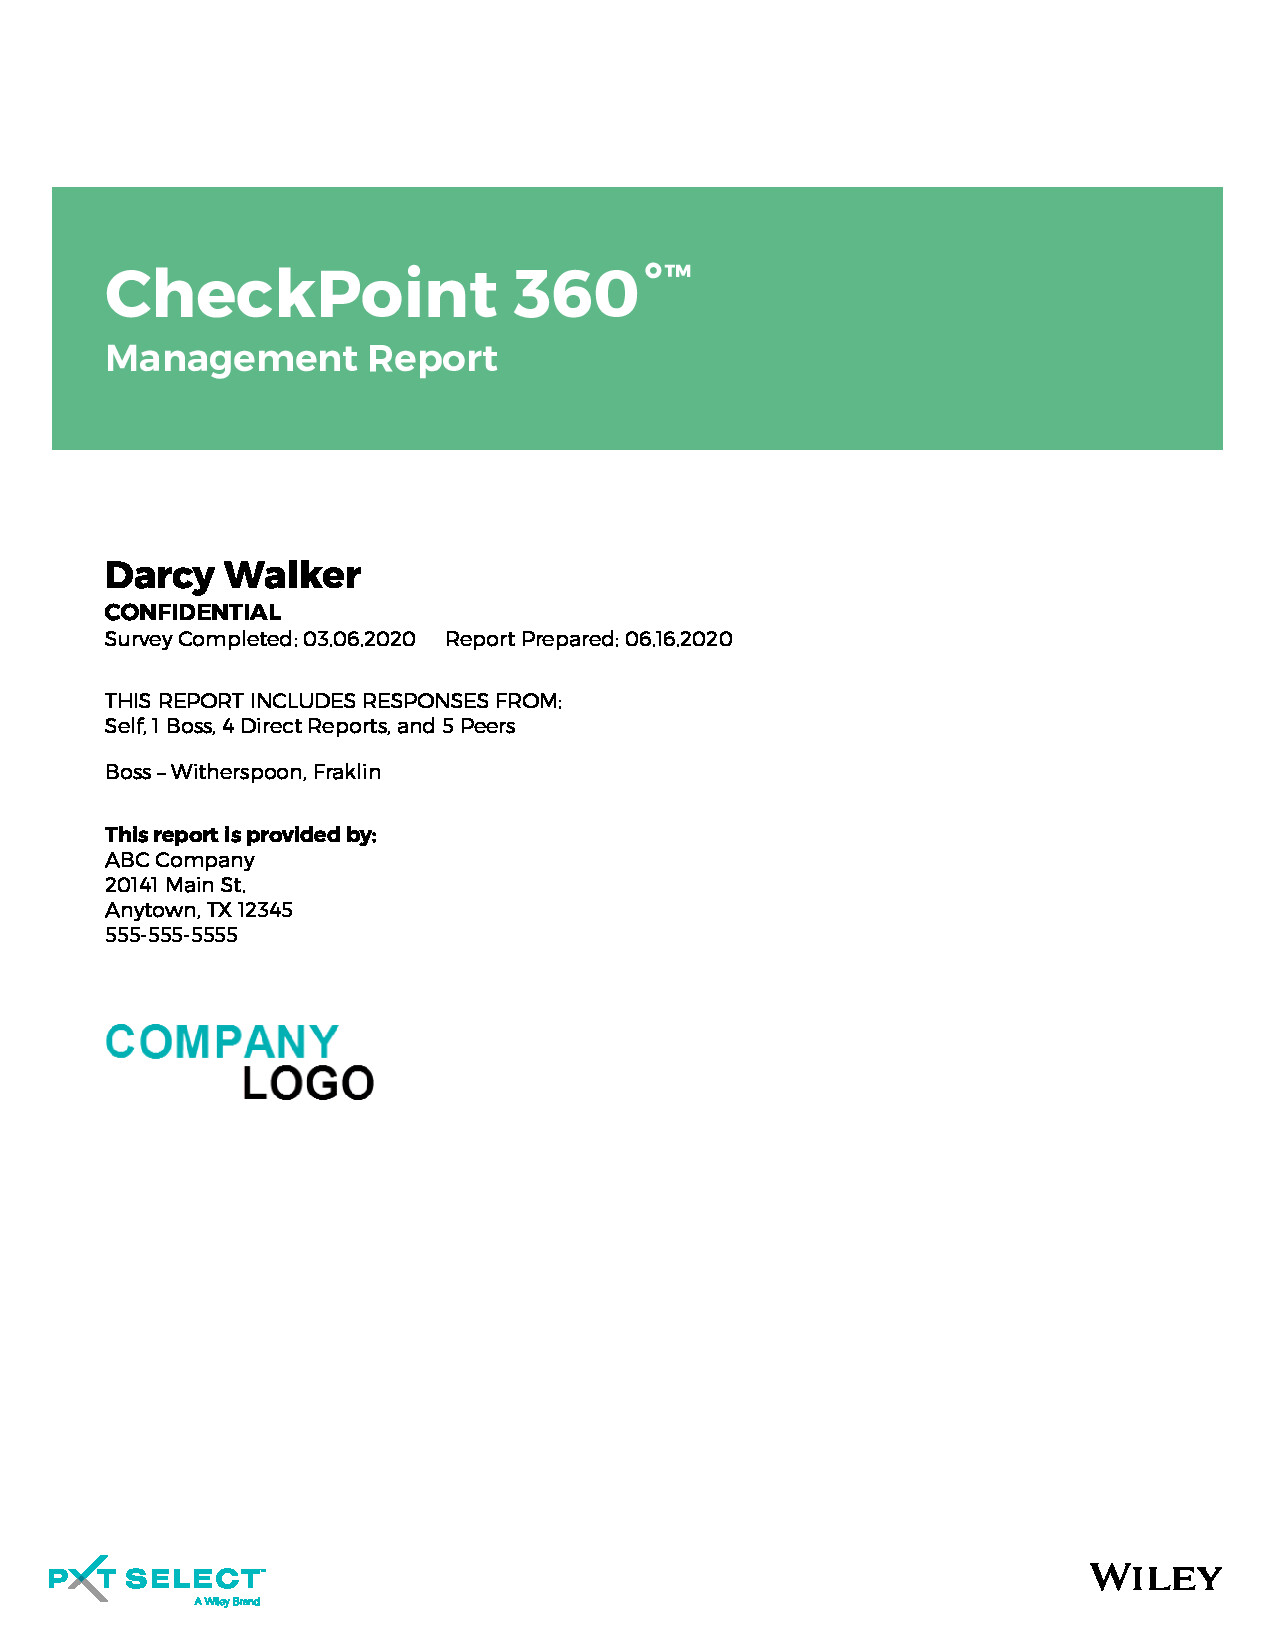 CheckPoint 360 Management Report Image